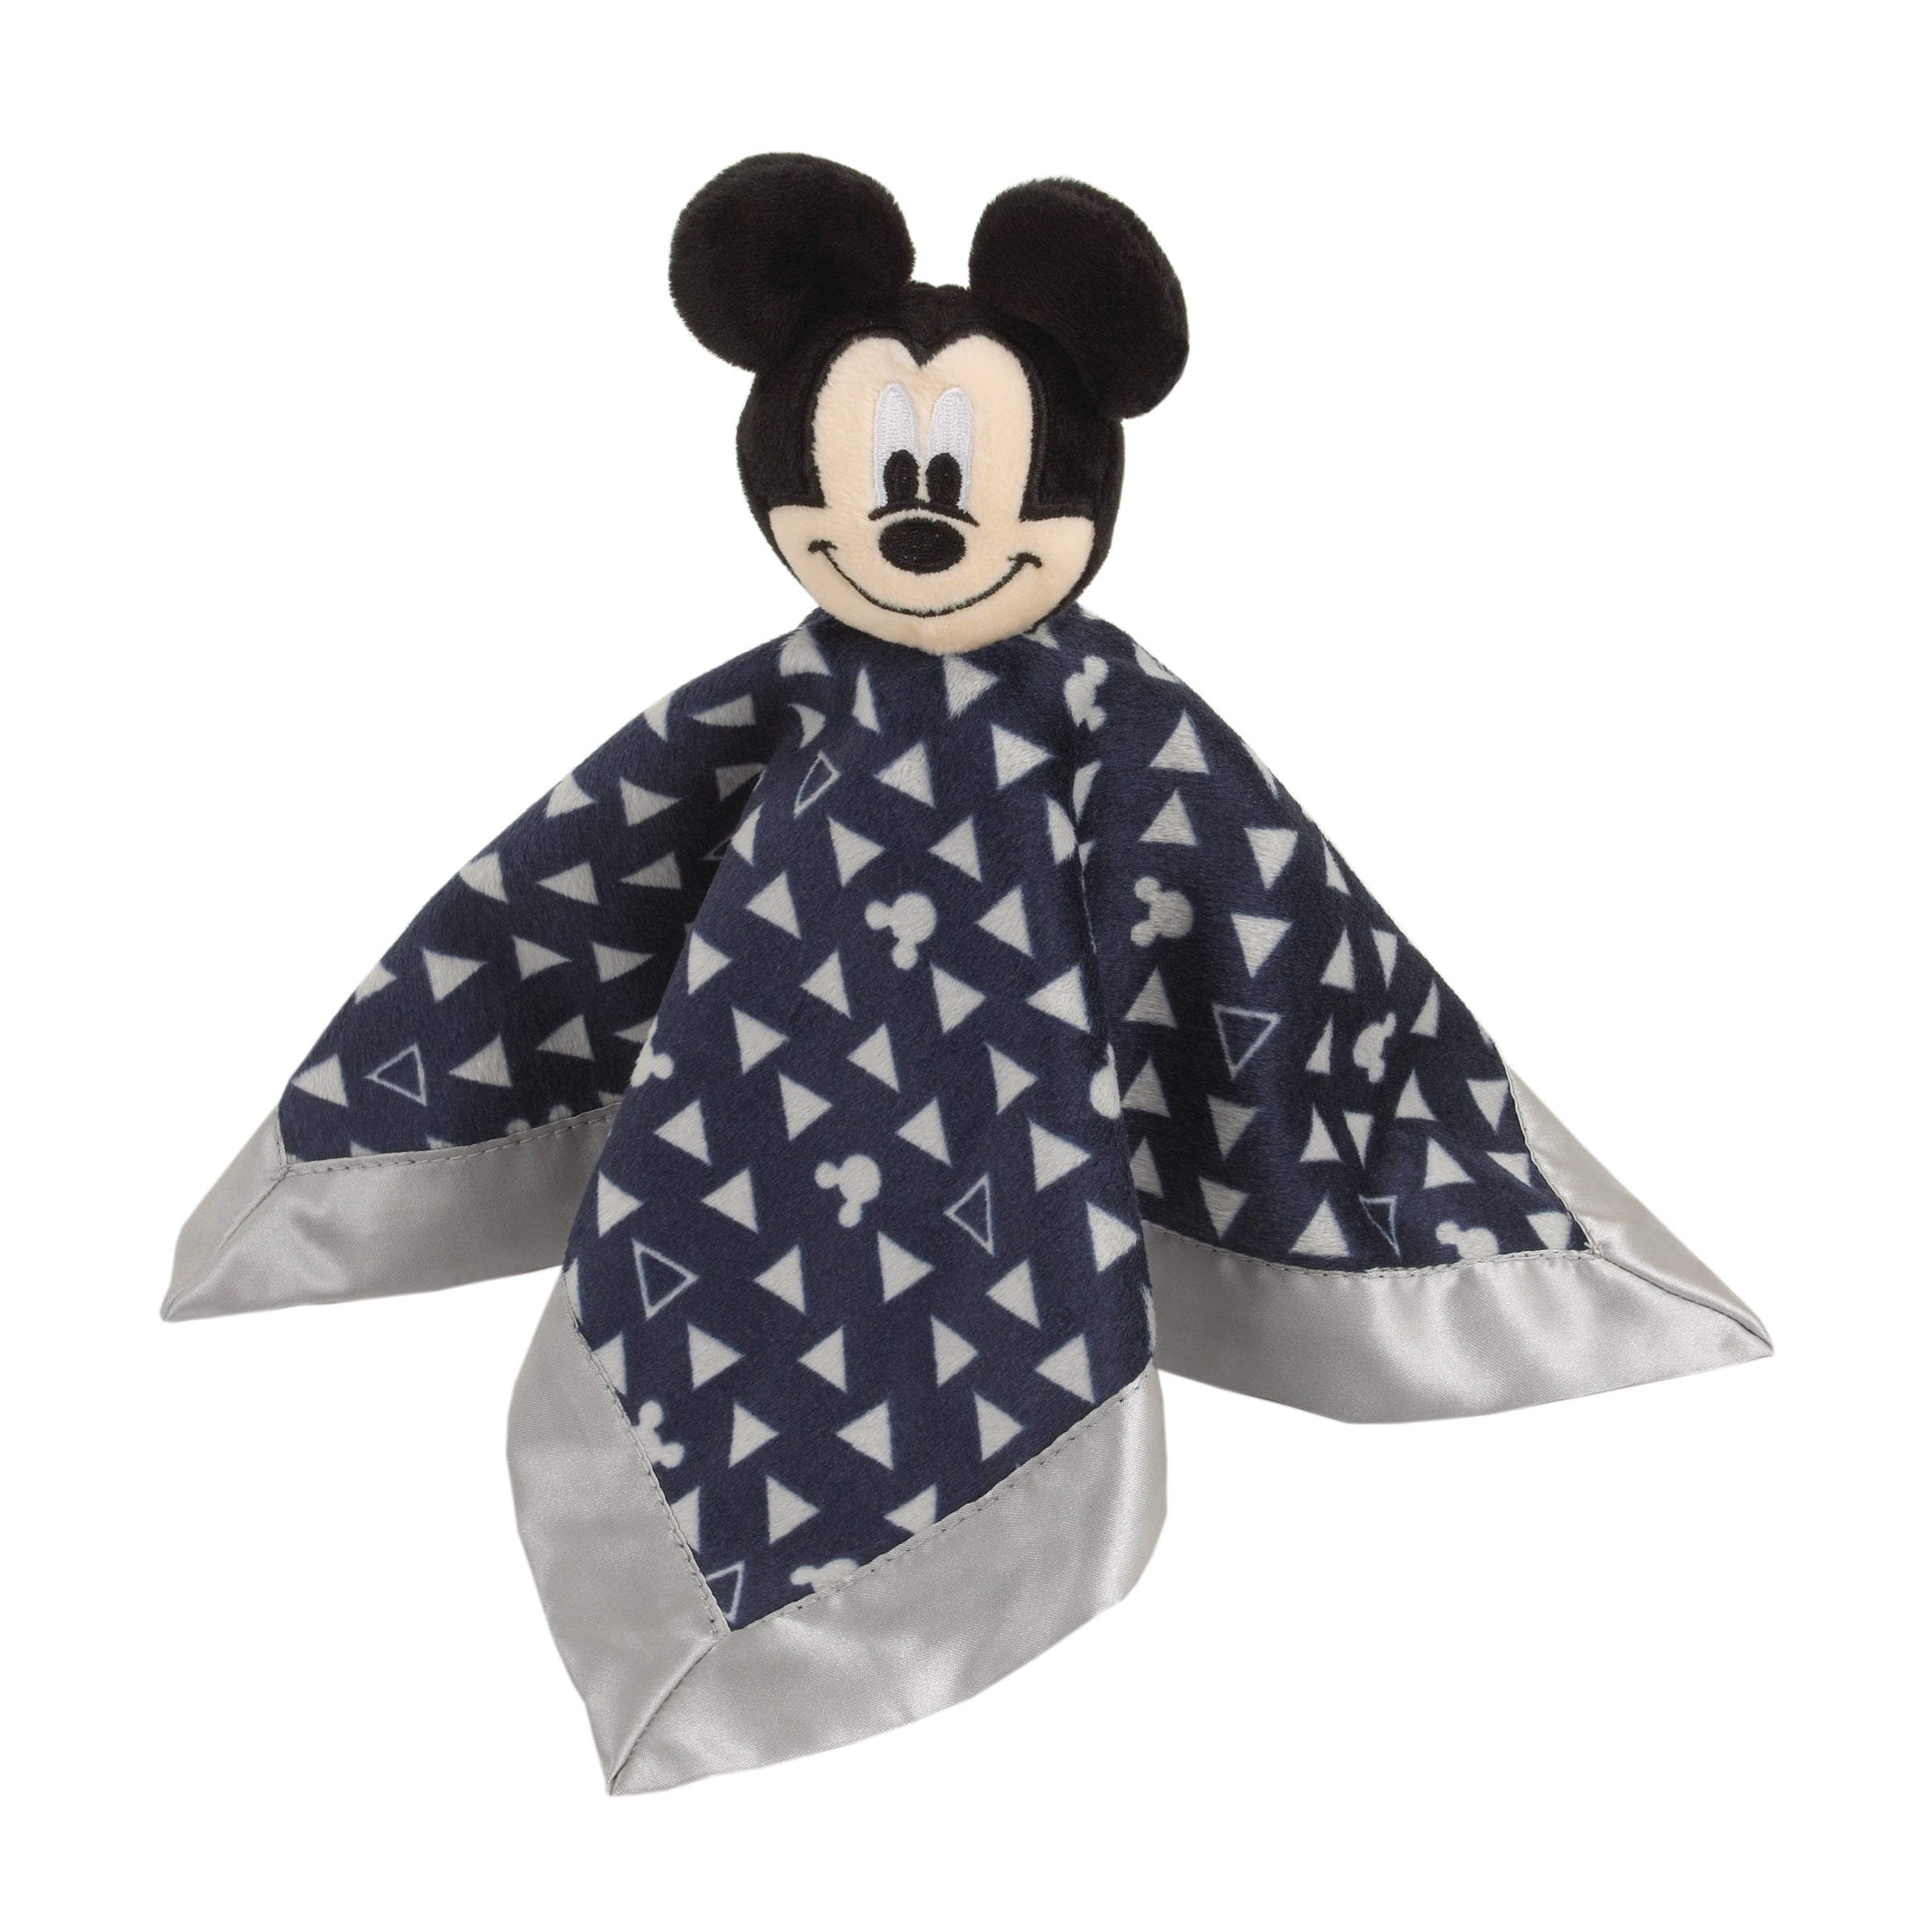 Disney Baby Blue Sleeping Mickey Mouse Lovey Security Blanket Plush Toy NWT 